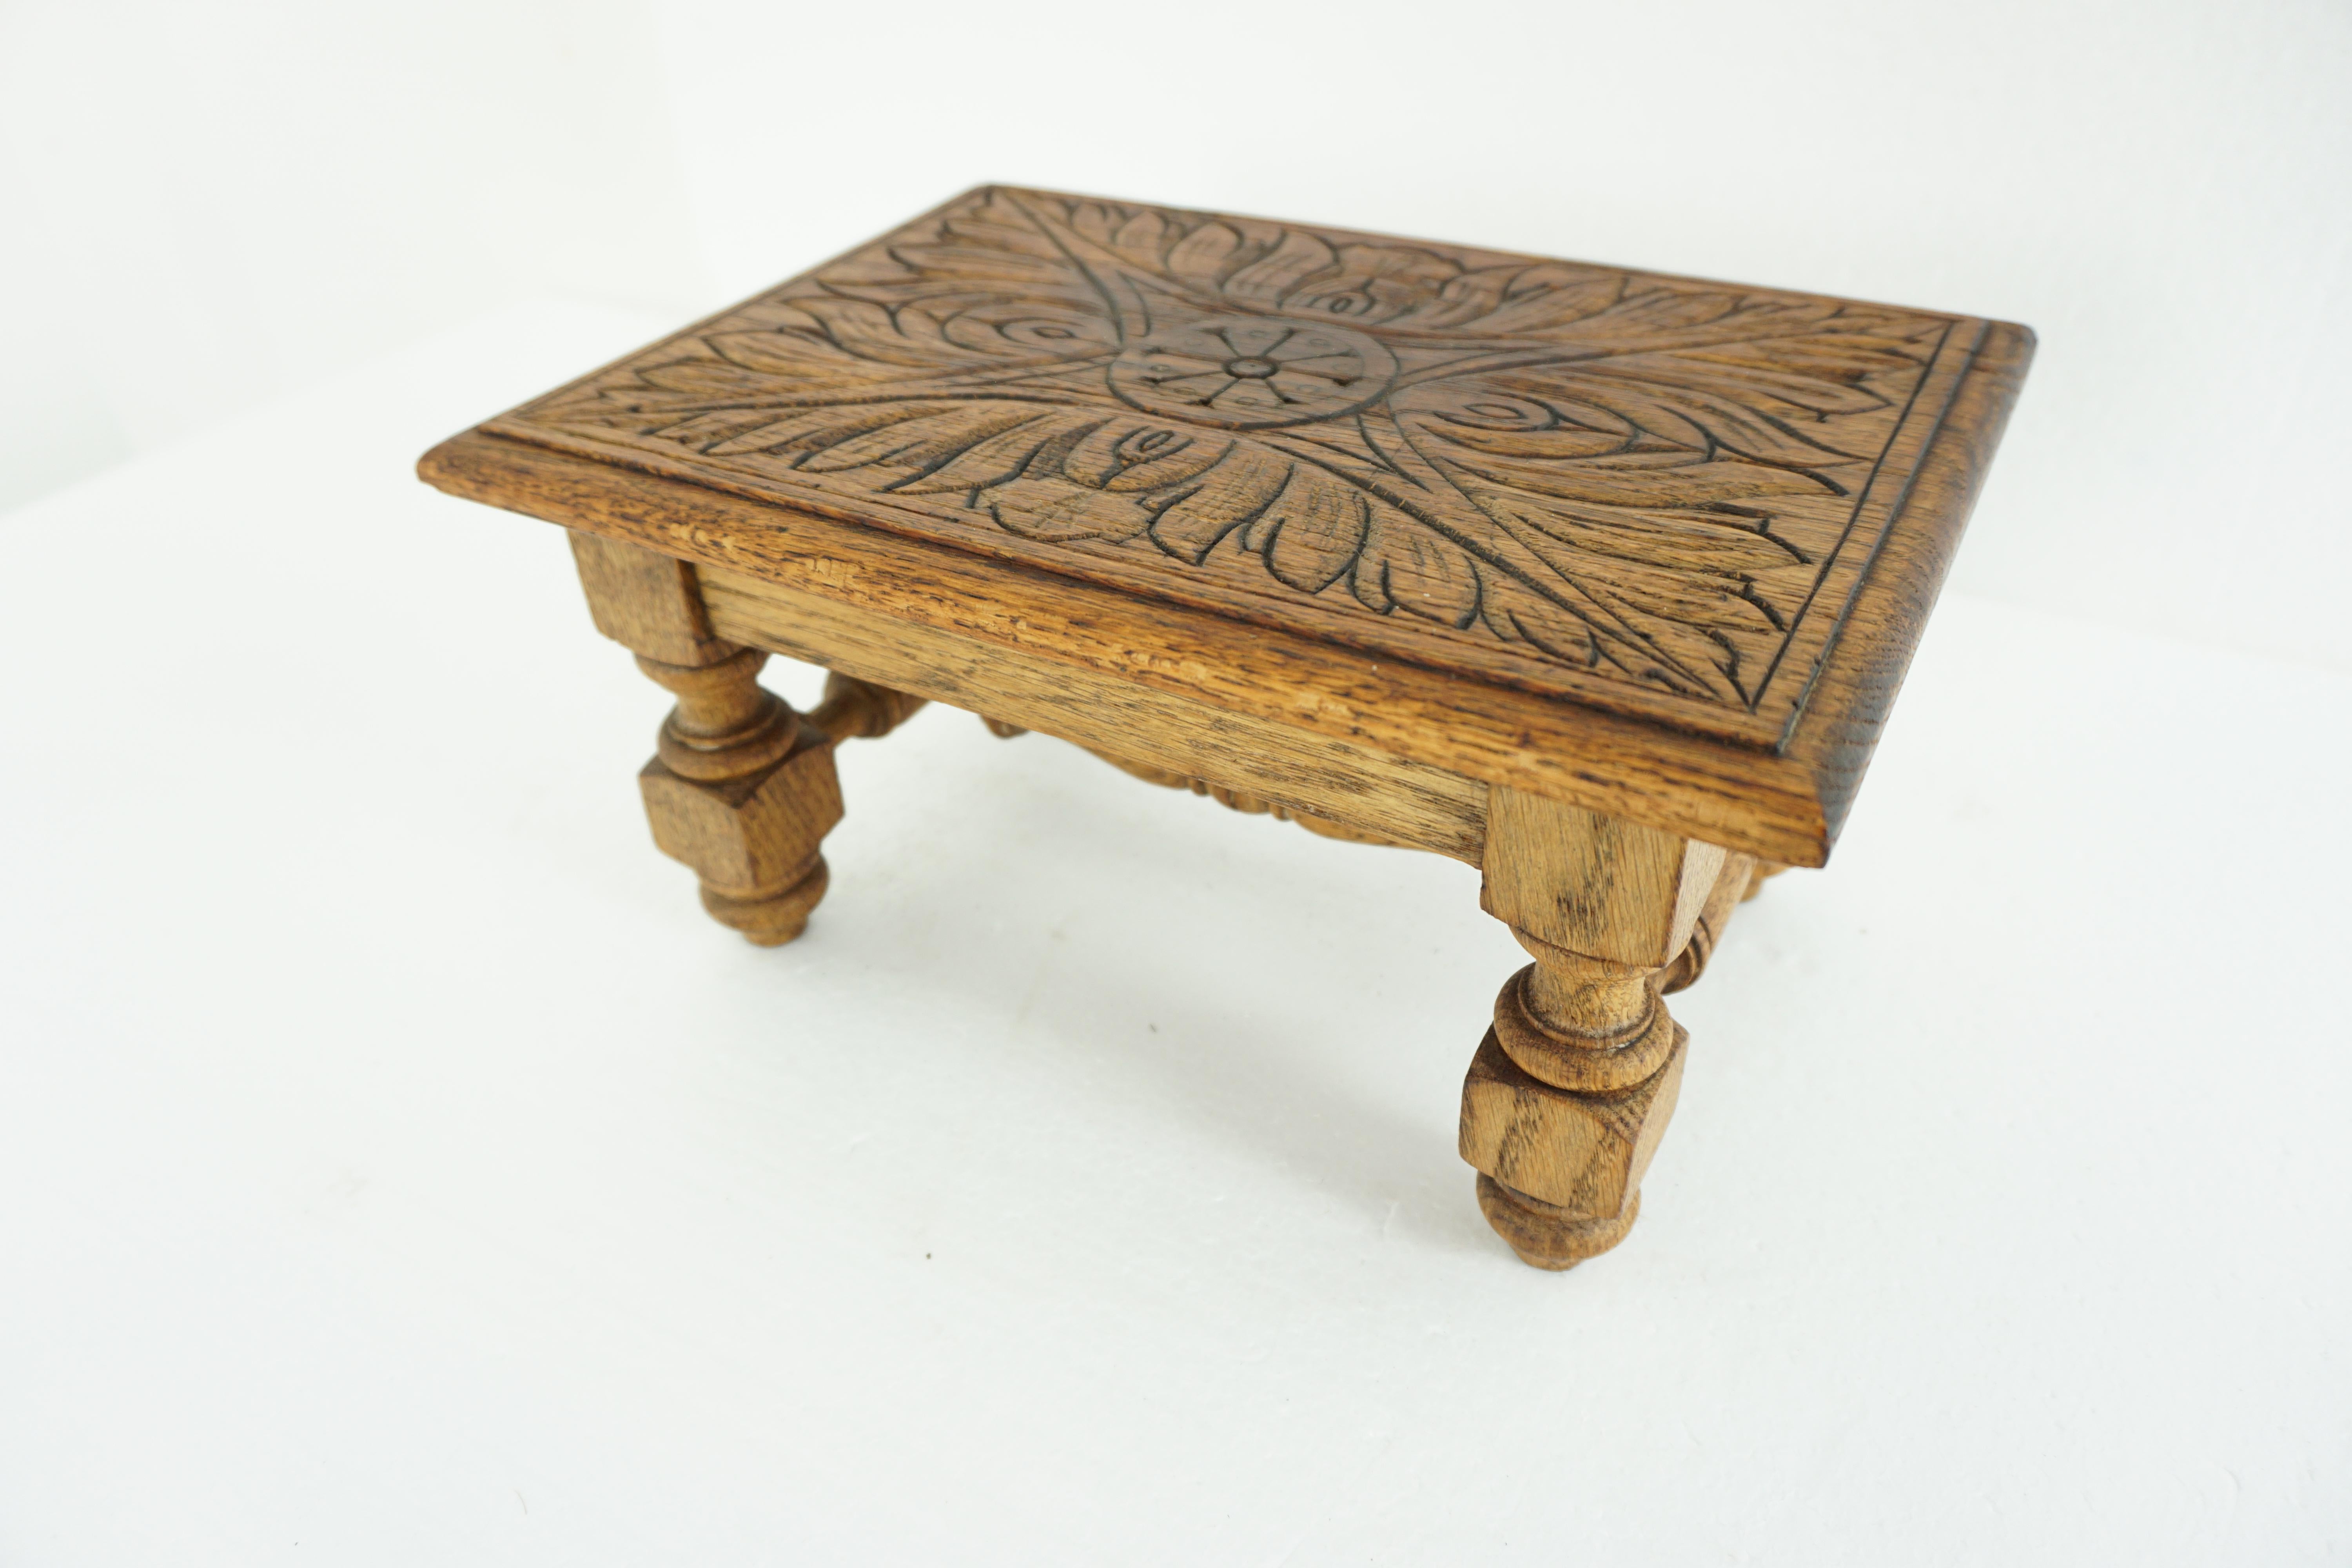 Antique Victorian carved oak Gothic Revival footstool, Scotland 1890 1812

Scotland

1890

Solid oak

Original finish

Carved rectangular flower motif top

Moulded edge

Sitting on four short turned legs 

With centre turned